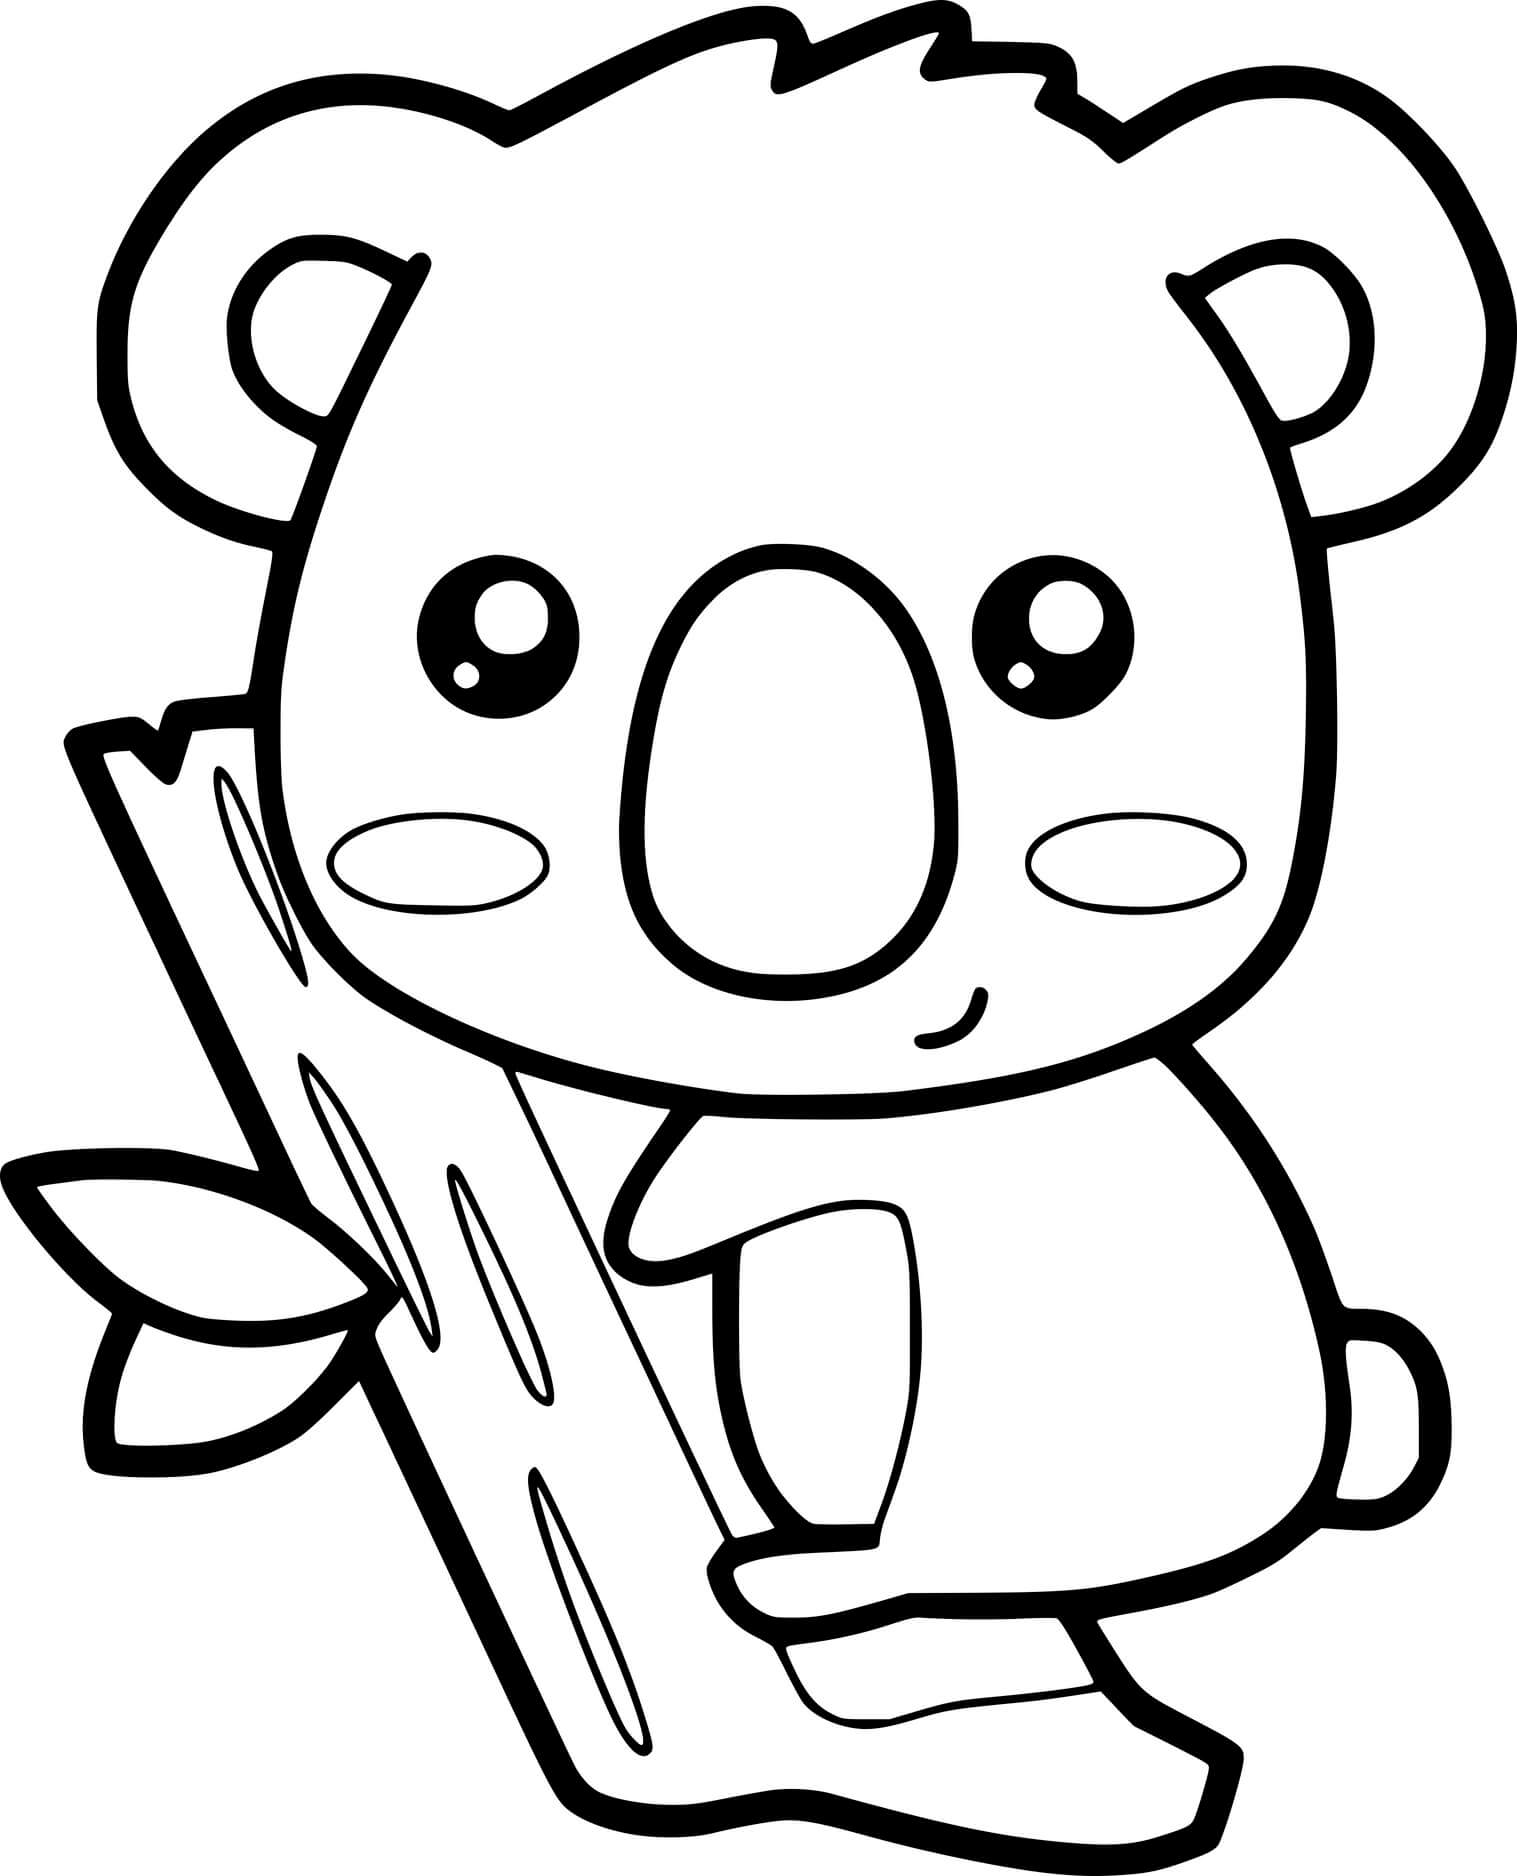 Cute Baby Koala Coloring Pages   Coloring Cool